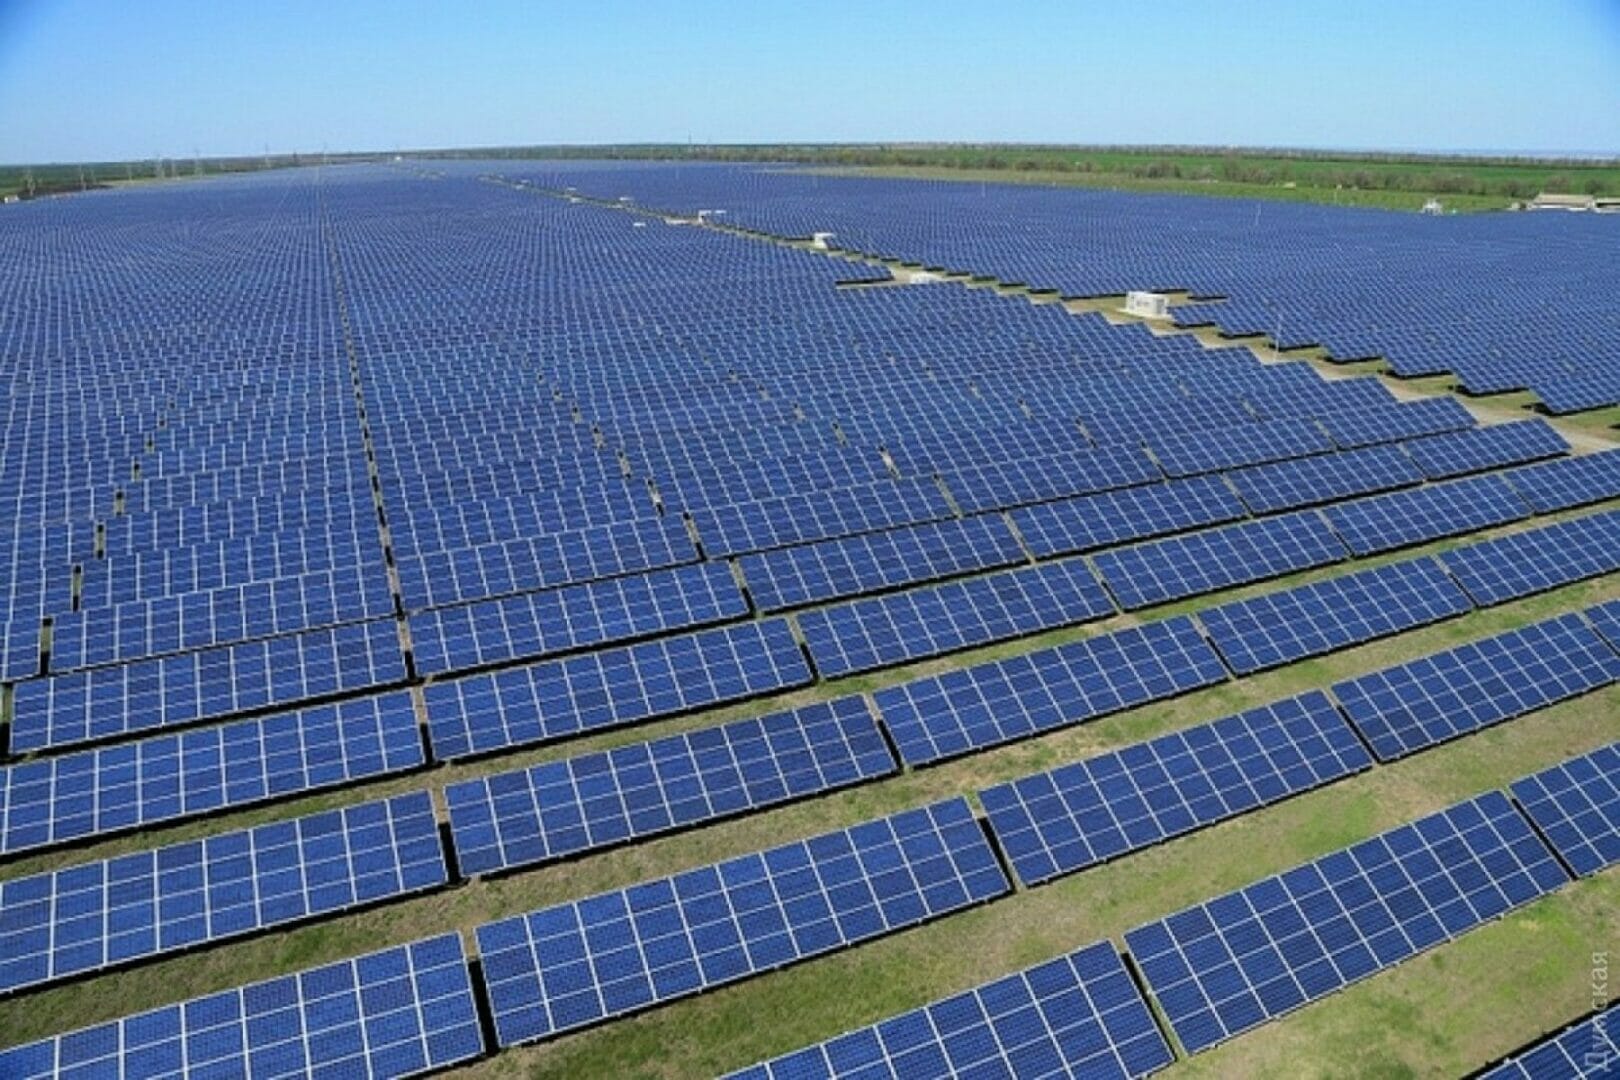 The largest solar power plant in Ukraine is located in the city of Tokmak